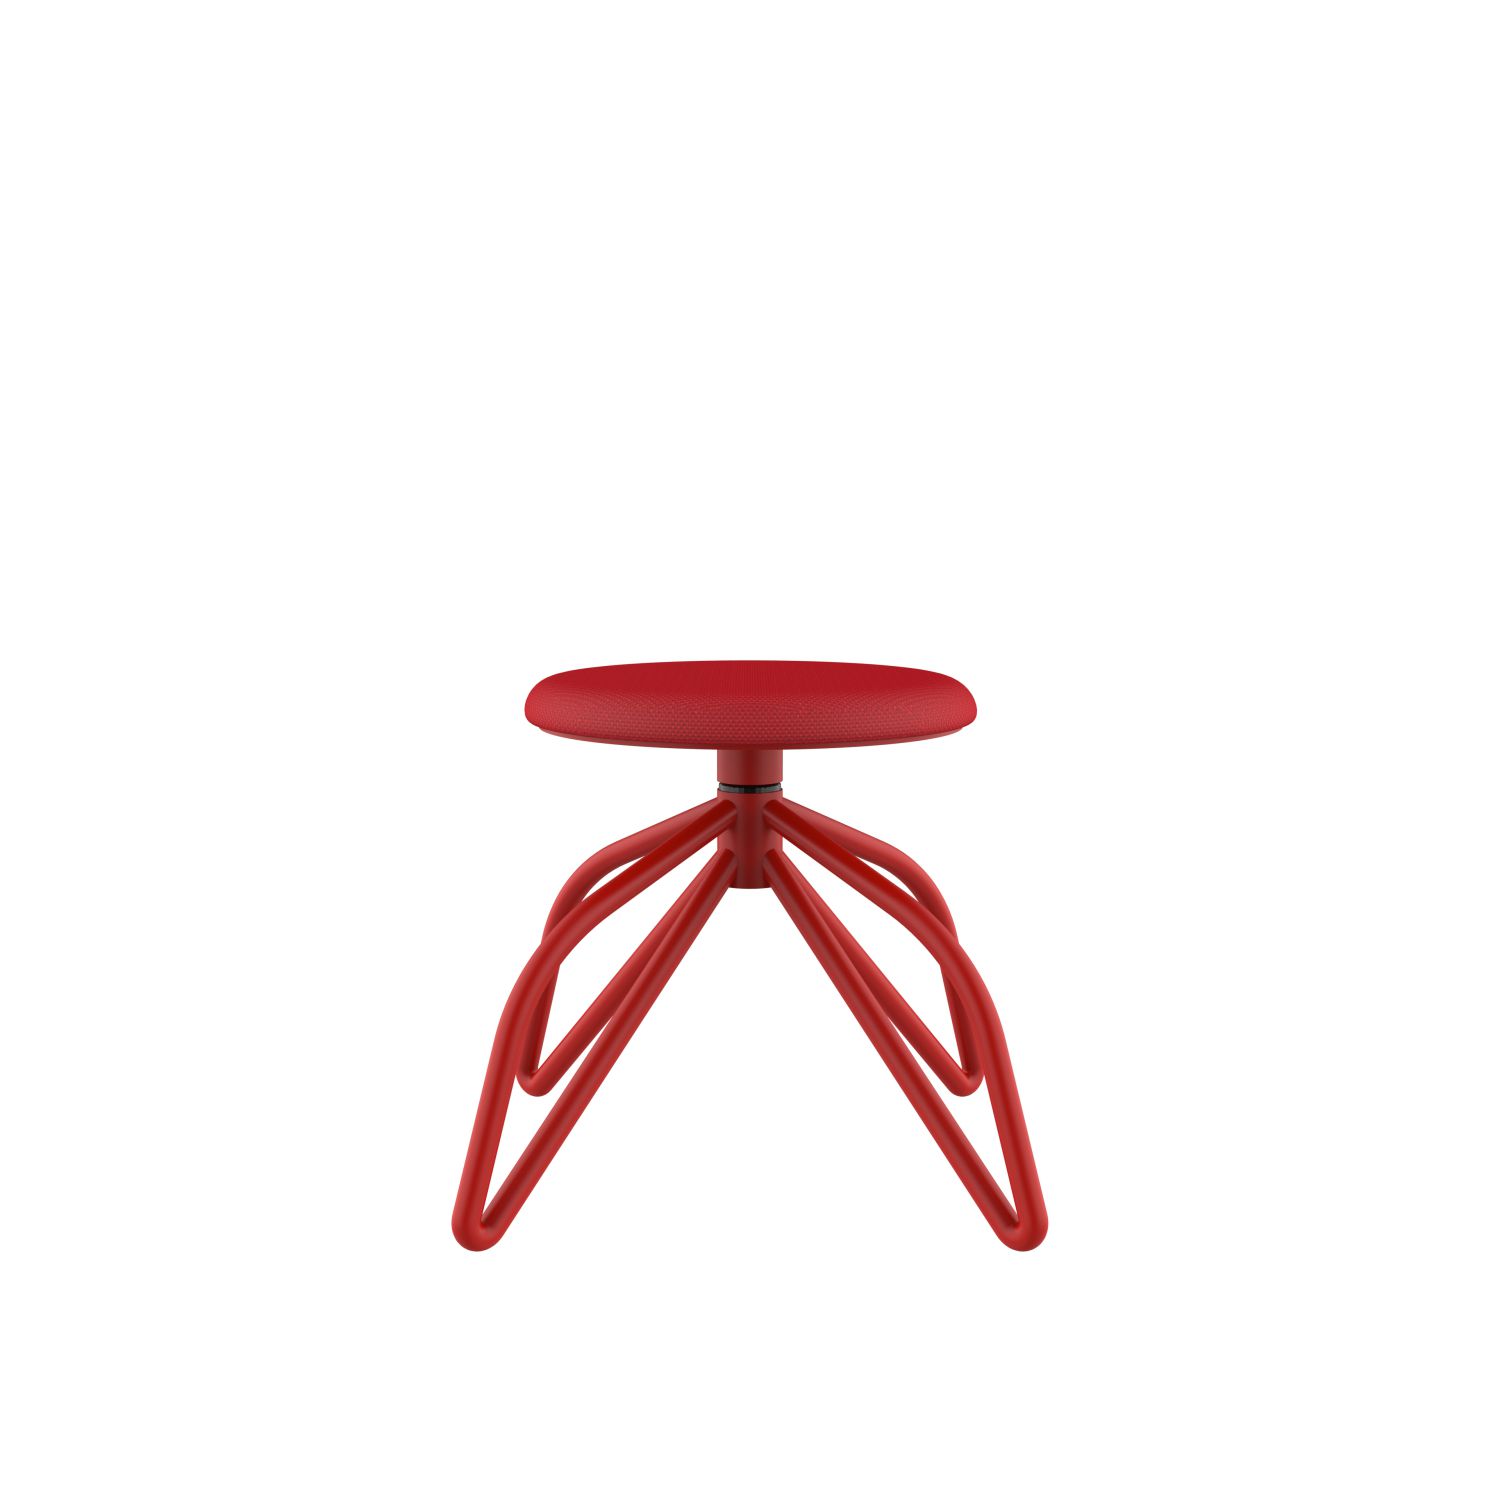 lensvelt powerhouse company coquille stool grenada red 010 traffic red ral3020 hard leg ends